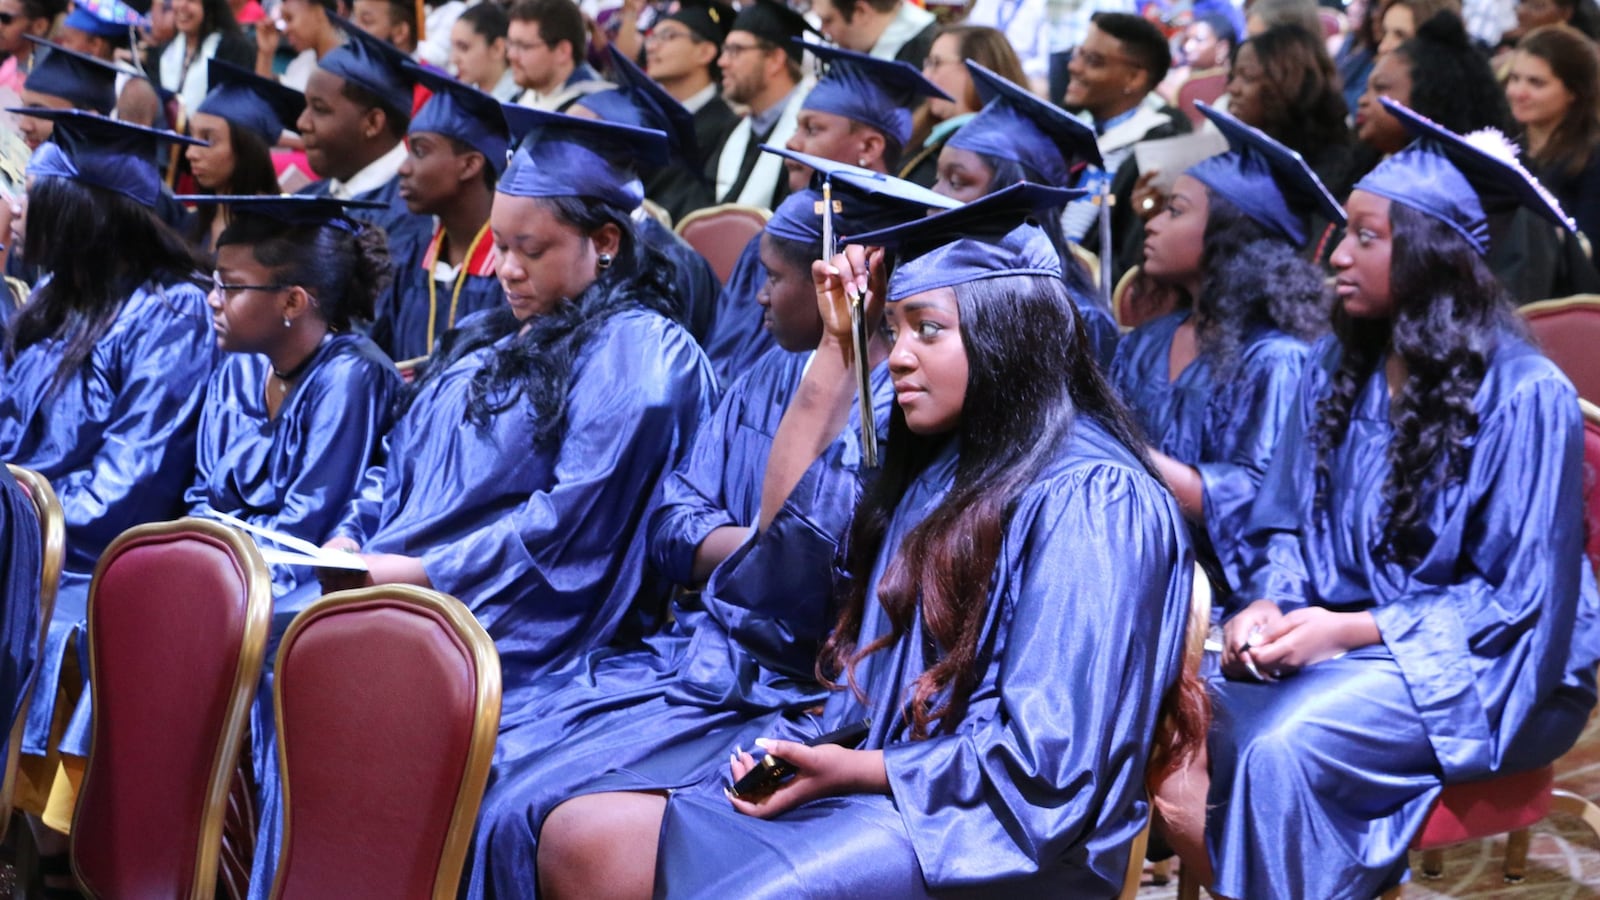 Students at KIPP Newark Collegiate Academy's graduation ceremonies in June 2018. This year's graduation events could be disrupted by the coronavirus pandemic.